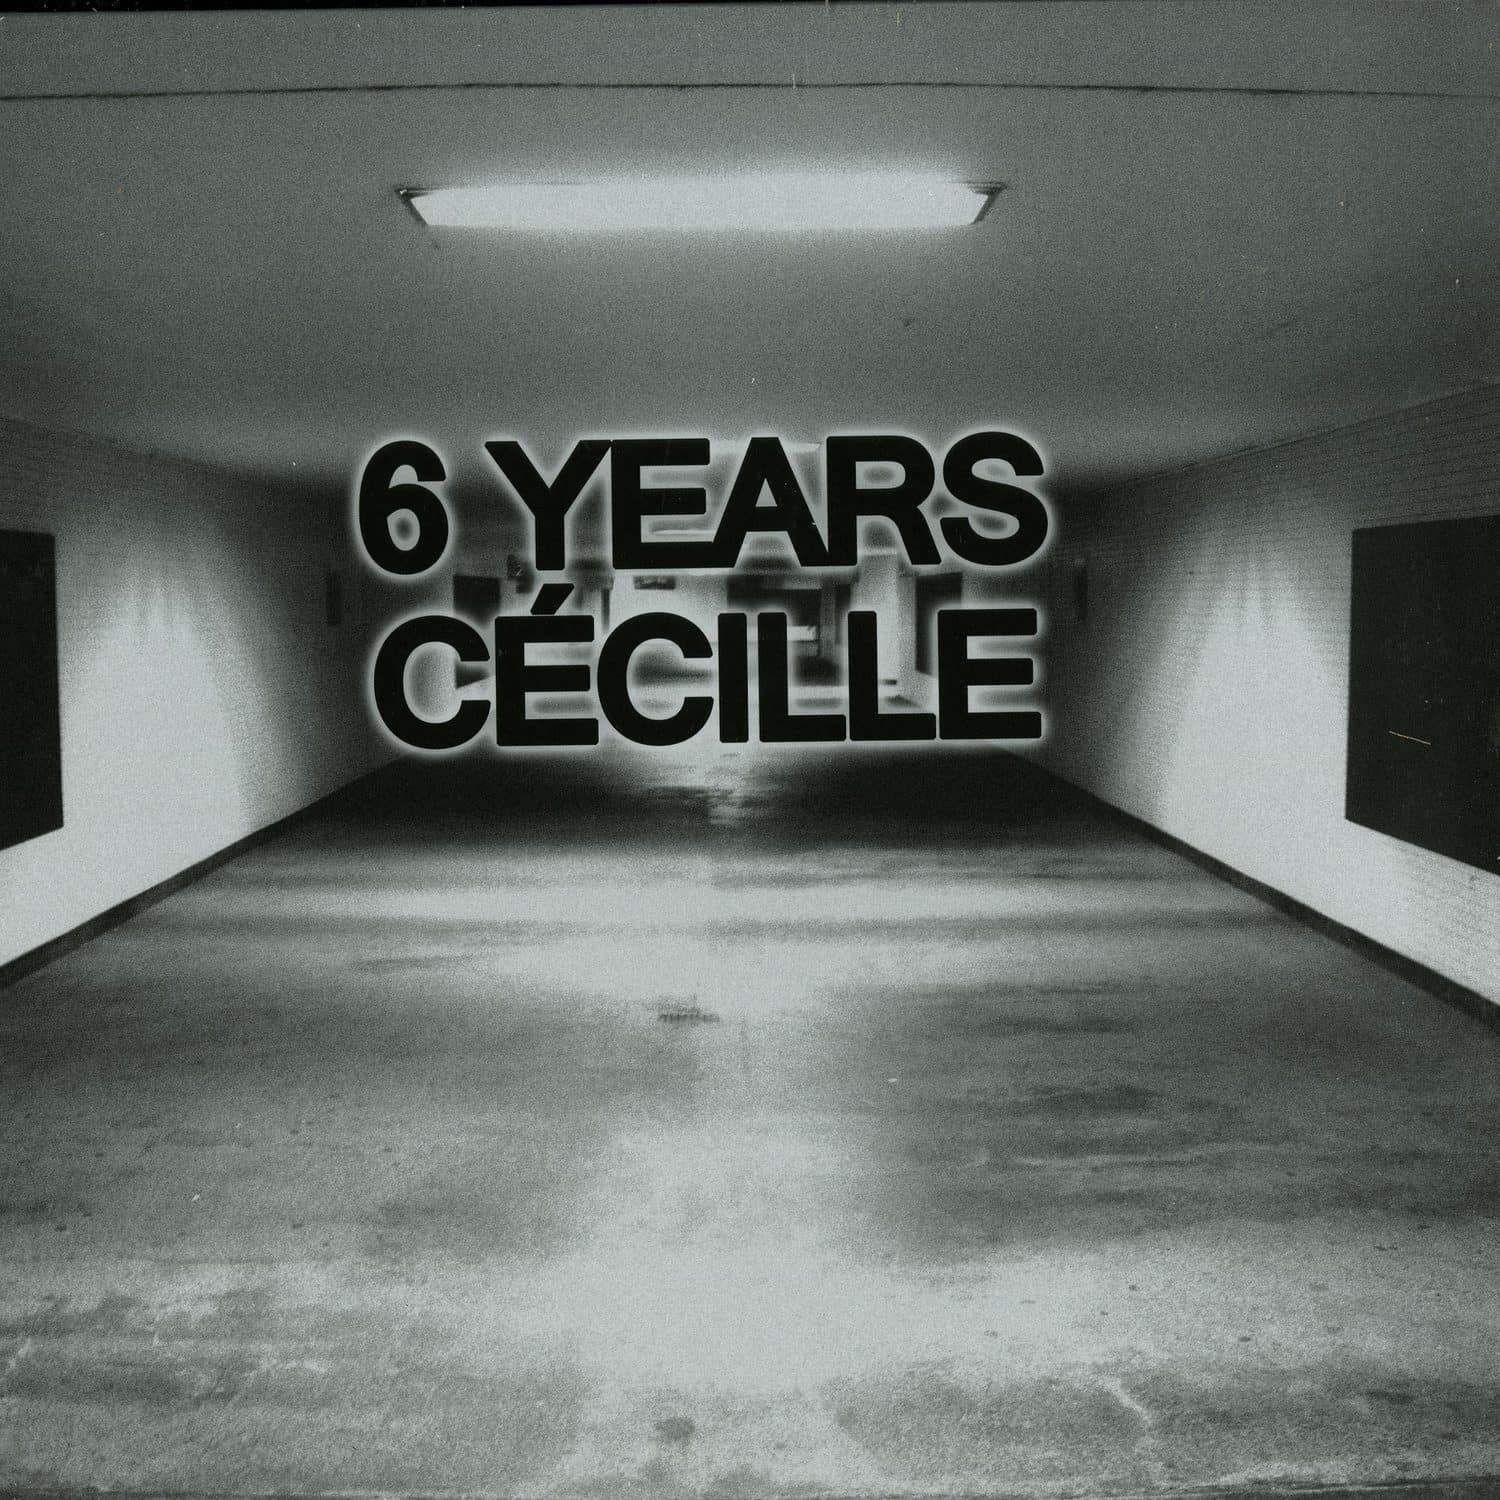 Various Artists - 6 YEARS CECILLE - 5X12 INCH LP BOX 